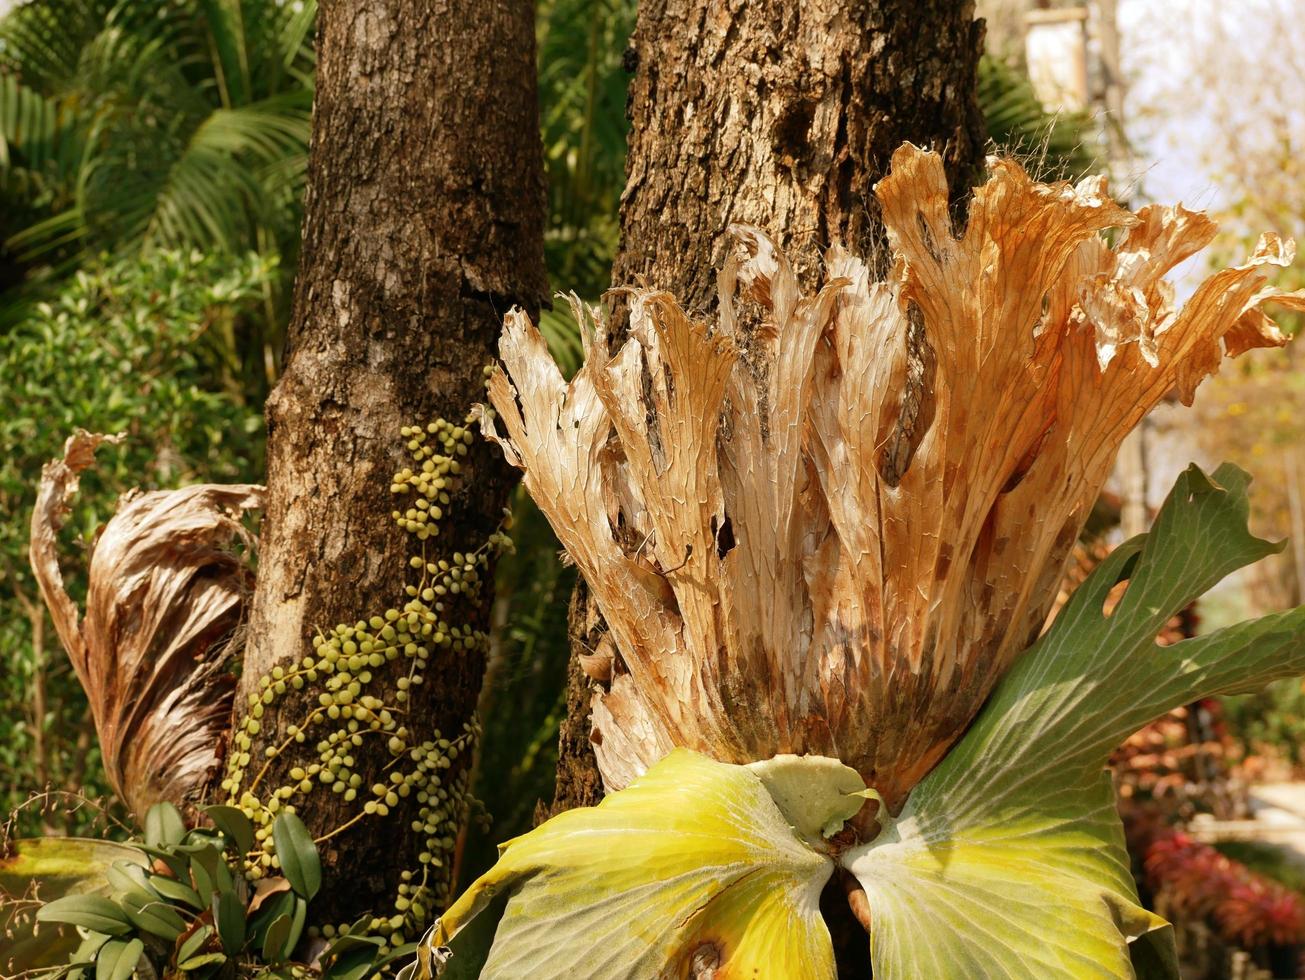 The large staghorn leaves live on the trees. photo